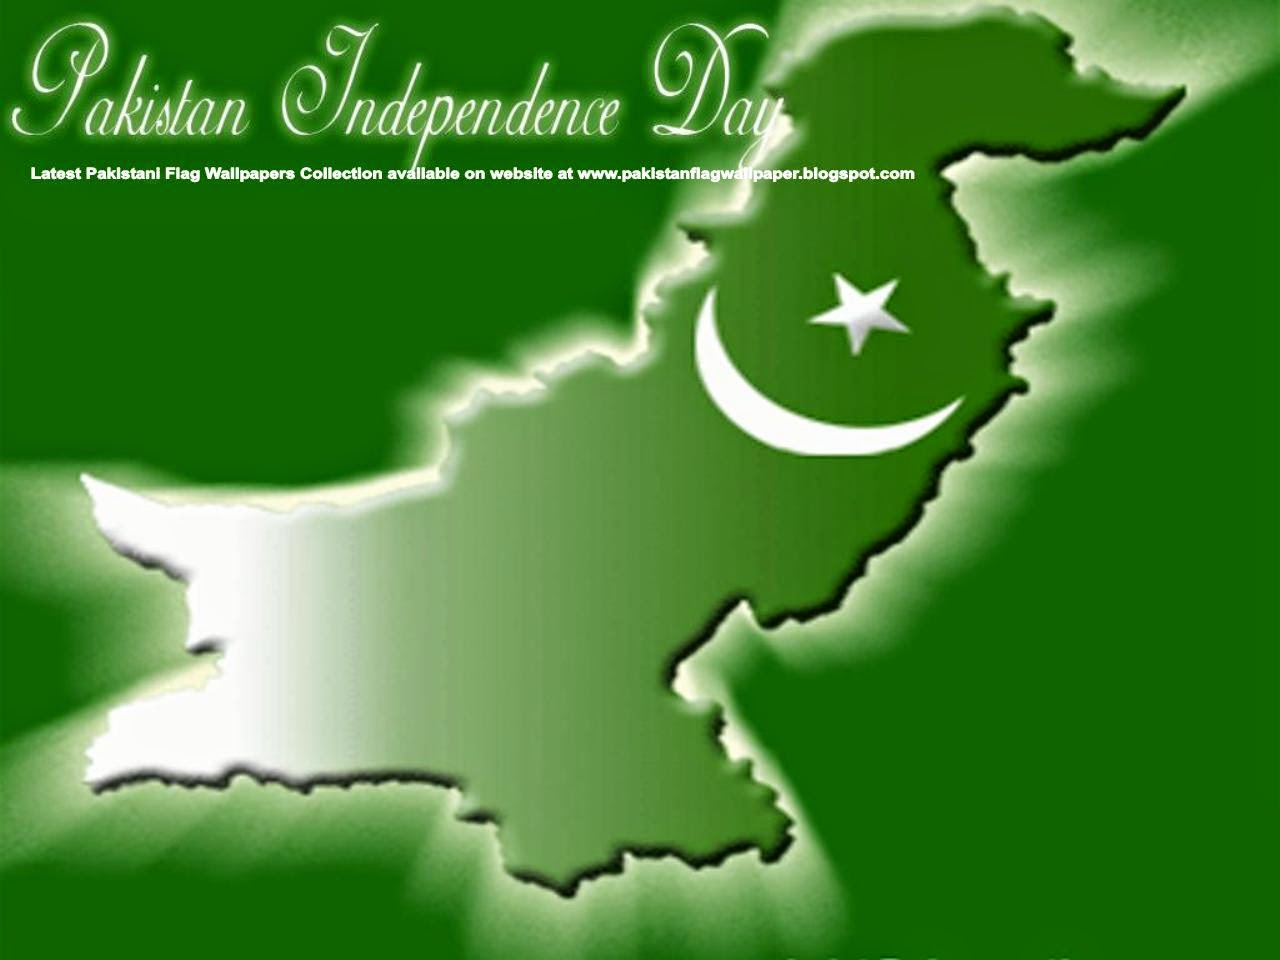 14 August Independence Day - HD Wallpaper 